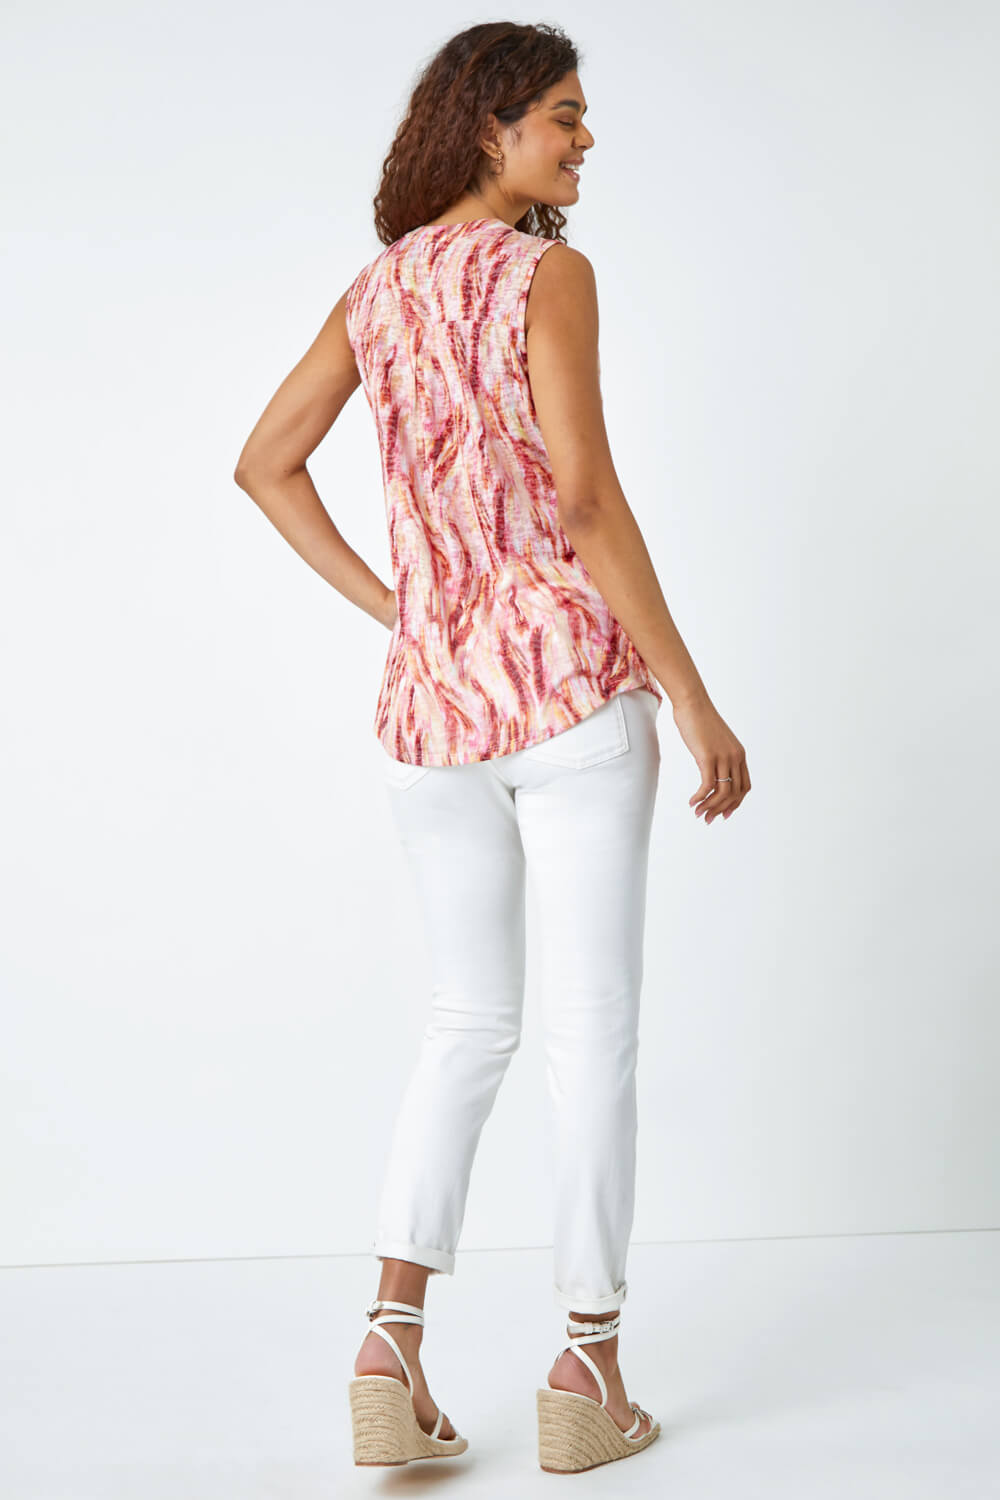 PINK Abstract Burnout Sleeveless Stretch Top, Image 3 of 5